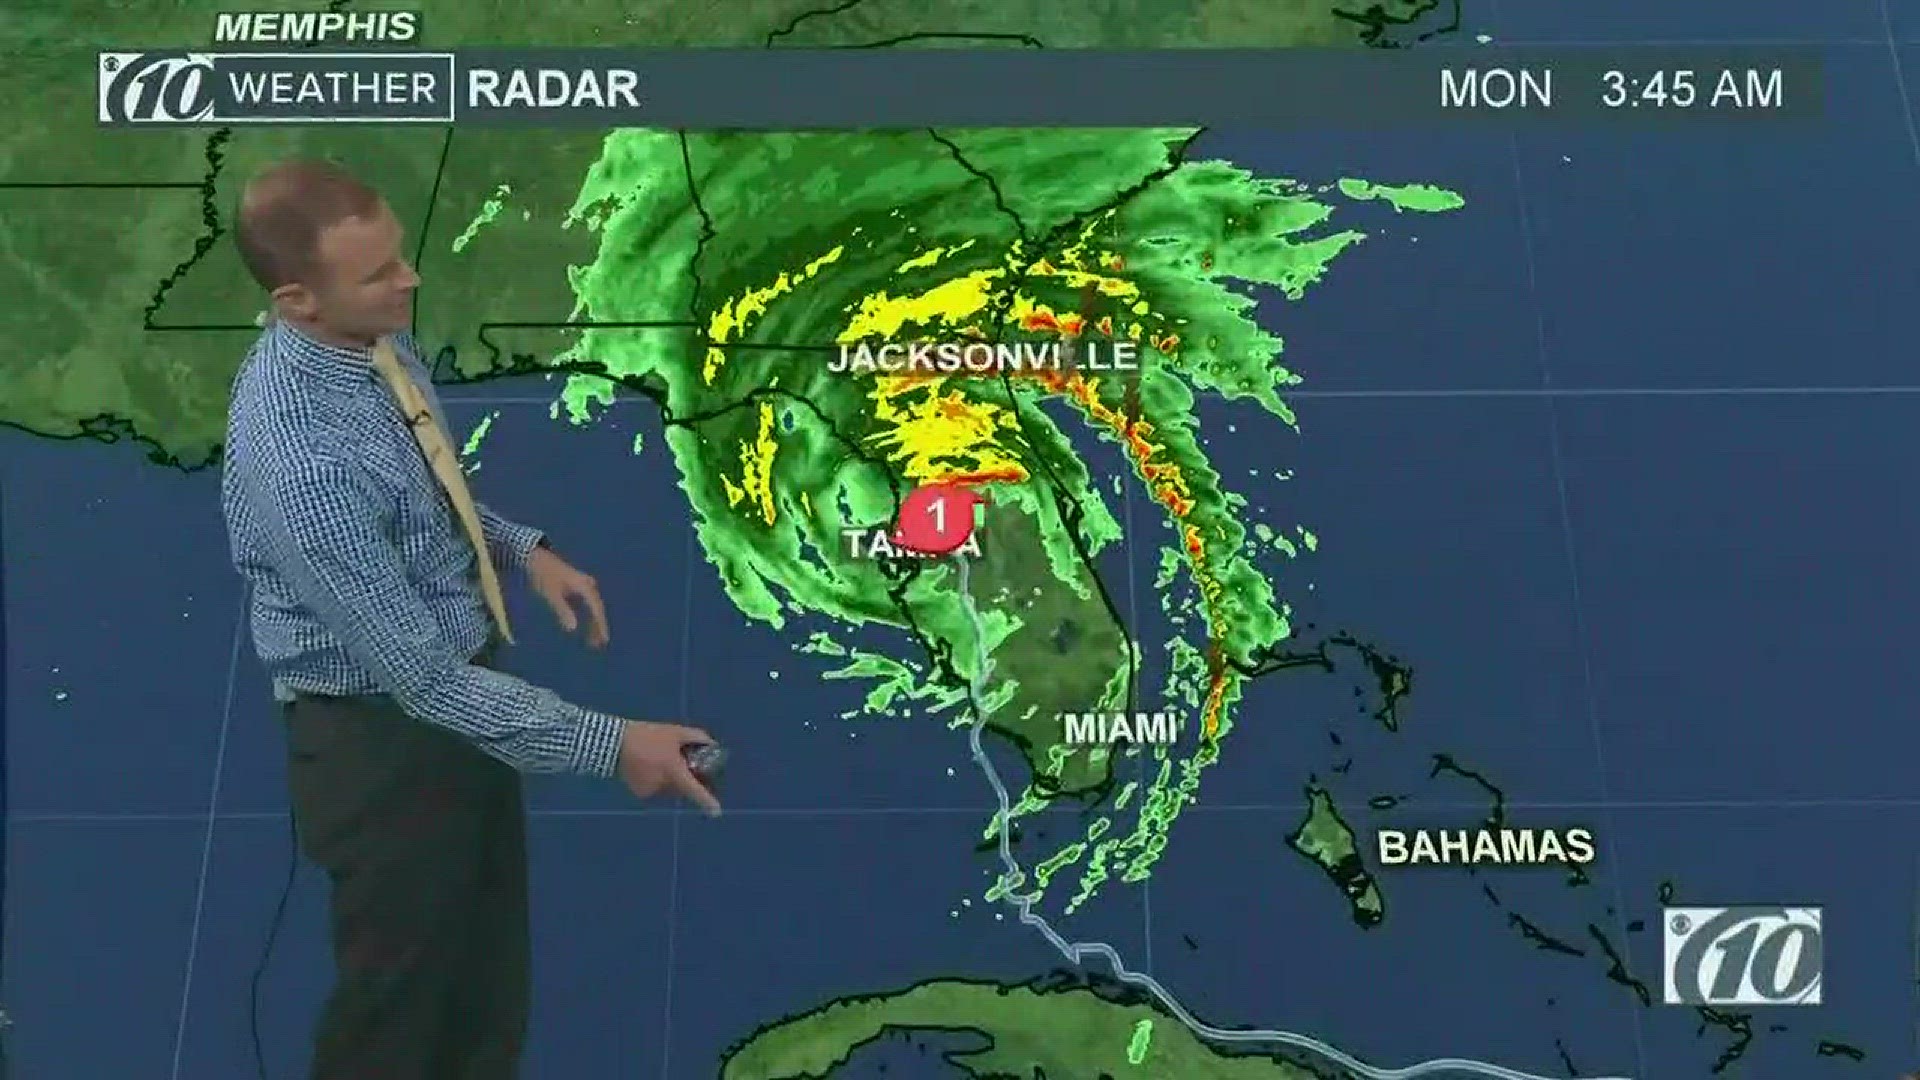 Hurricane Irma is nearing its end after having intensified to a major hurricane through the course of its life.